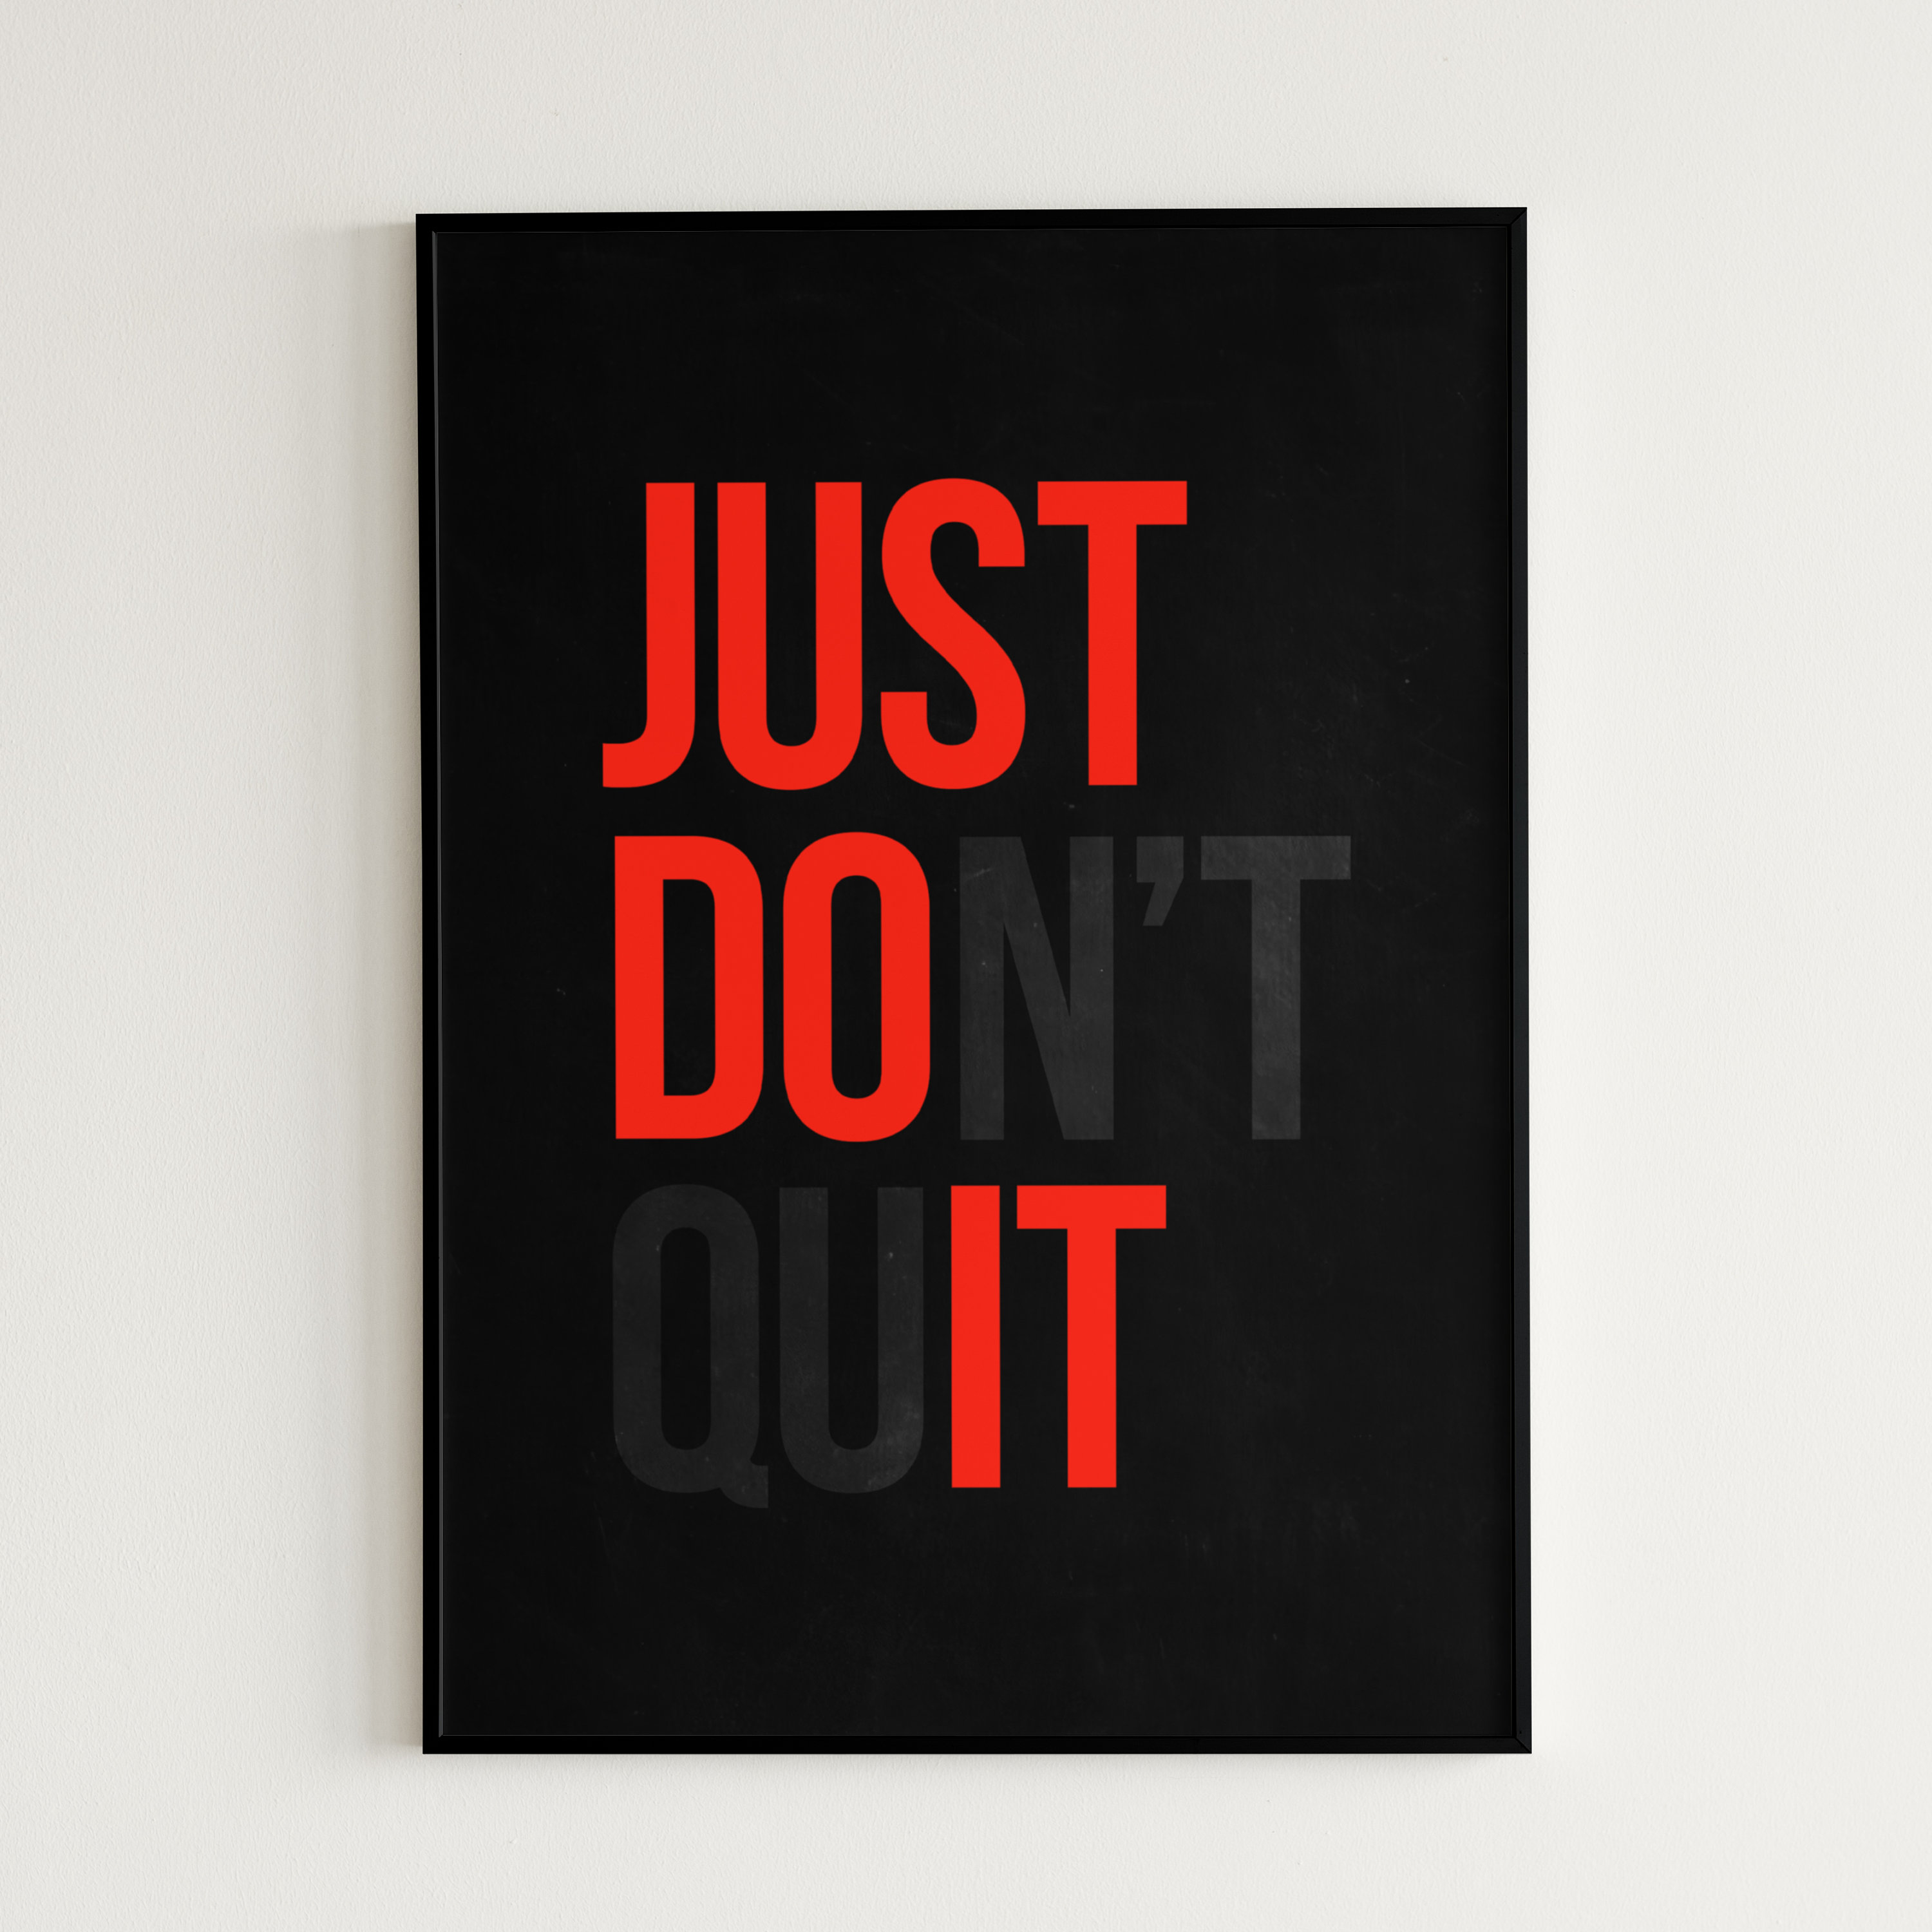 Just Don\'t Quit - Etsy